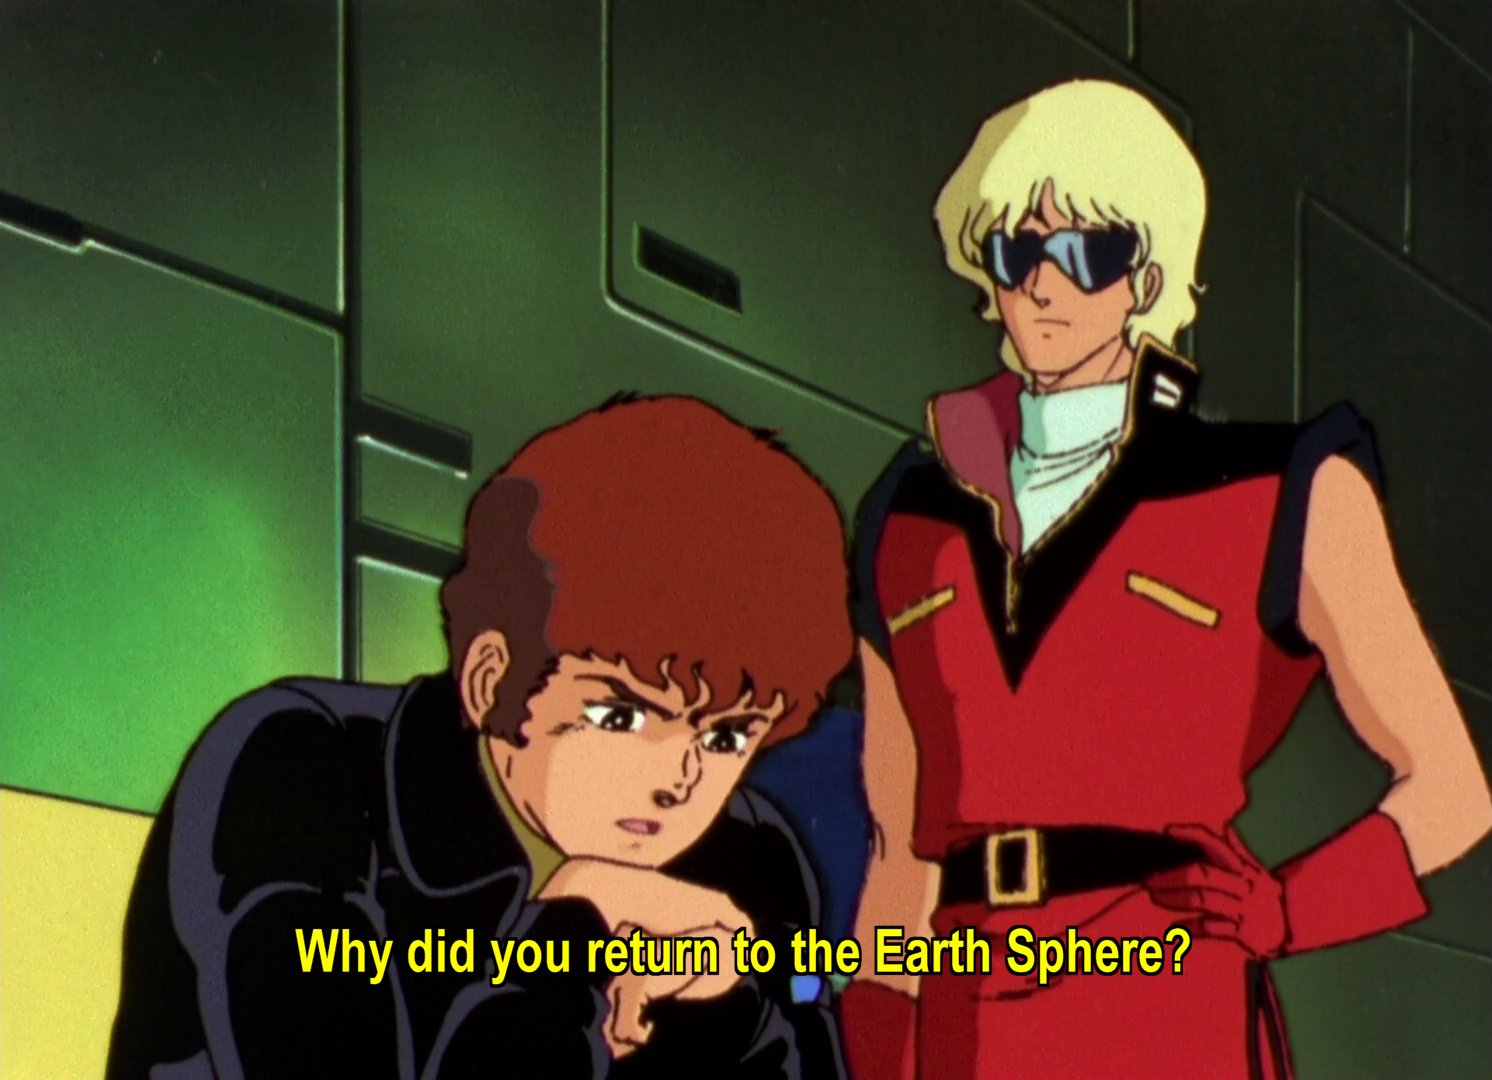 Lt Quattro standing beside Amuro in the hanger.  Amuro: Why did you return to the Earth Sphere?